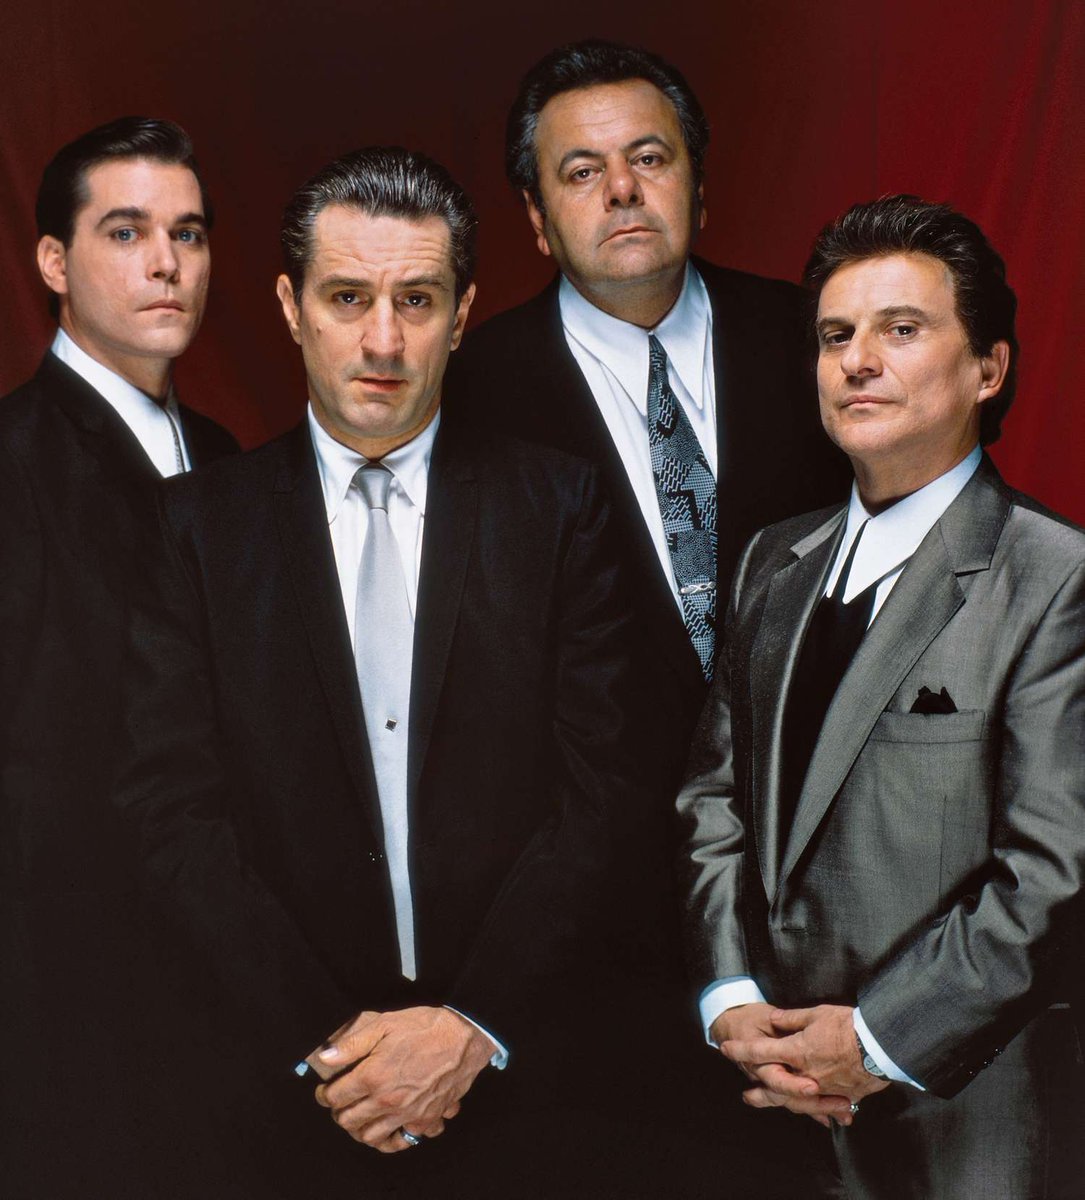 Let's rewind to the legendary filming of Goodfellas right here at Kaufman Astoria Production Studio. Dive into the behind-the-scenes tales, mobster drama, and cinematic magic that graced our studio. Get ready for a trip down memory lane! #Goodfellas #Throwback #KaufmanAstoria